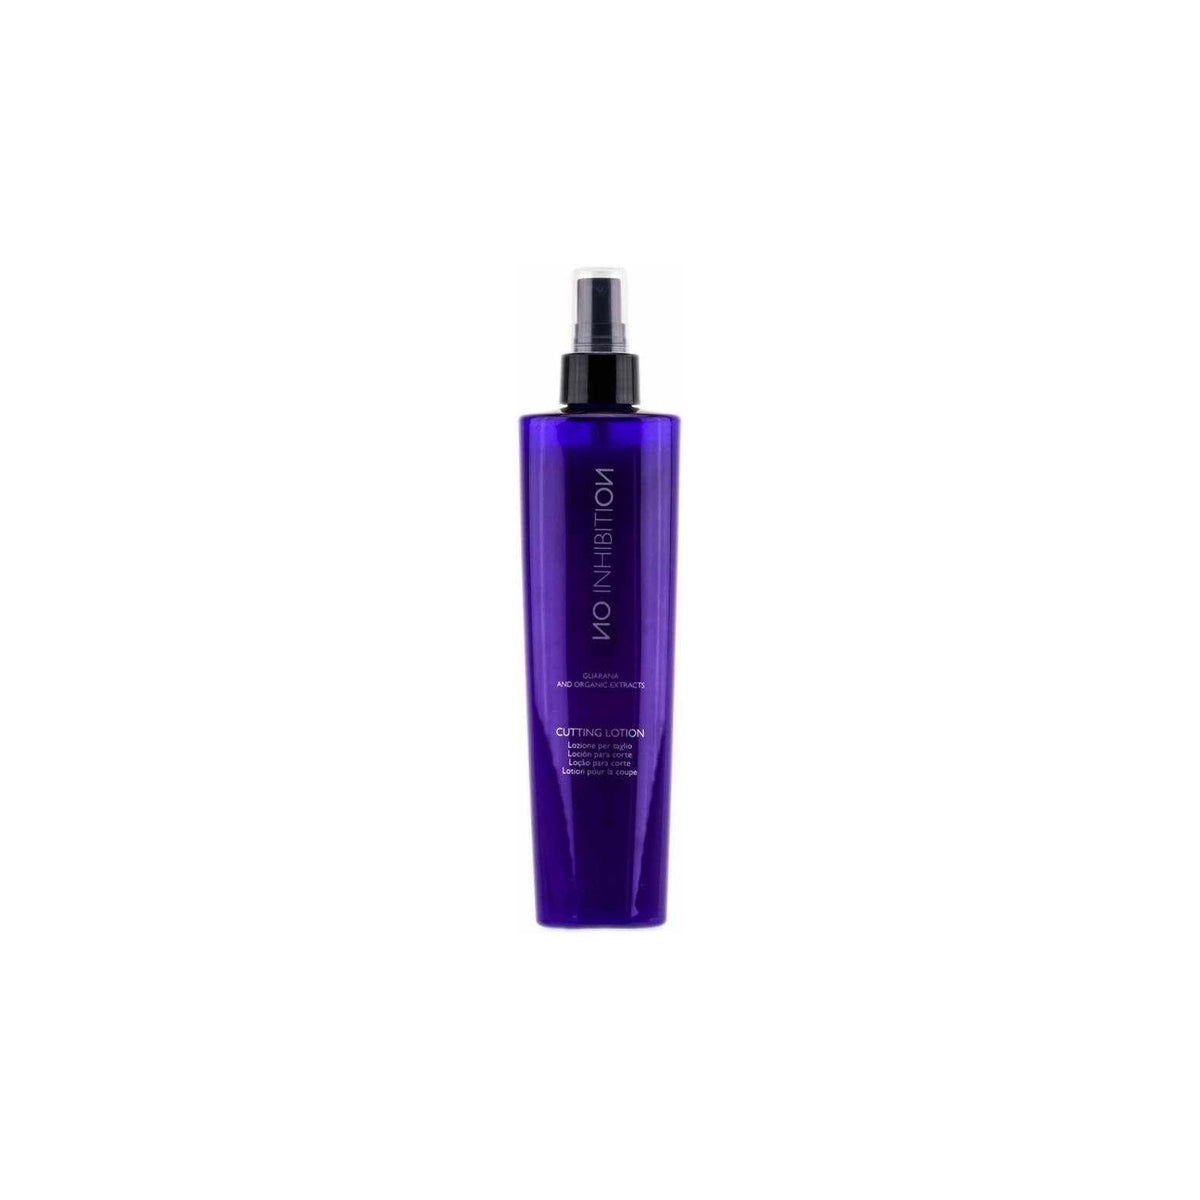 No Inhibition Cutting Lotion 250ml